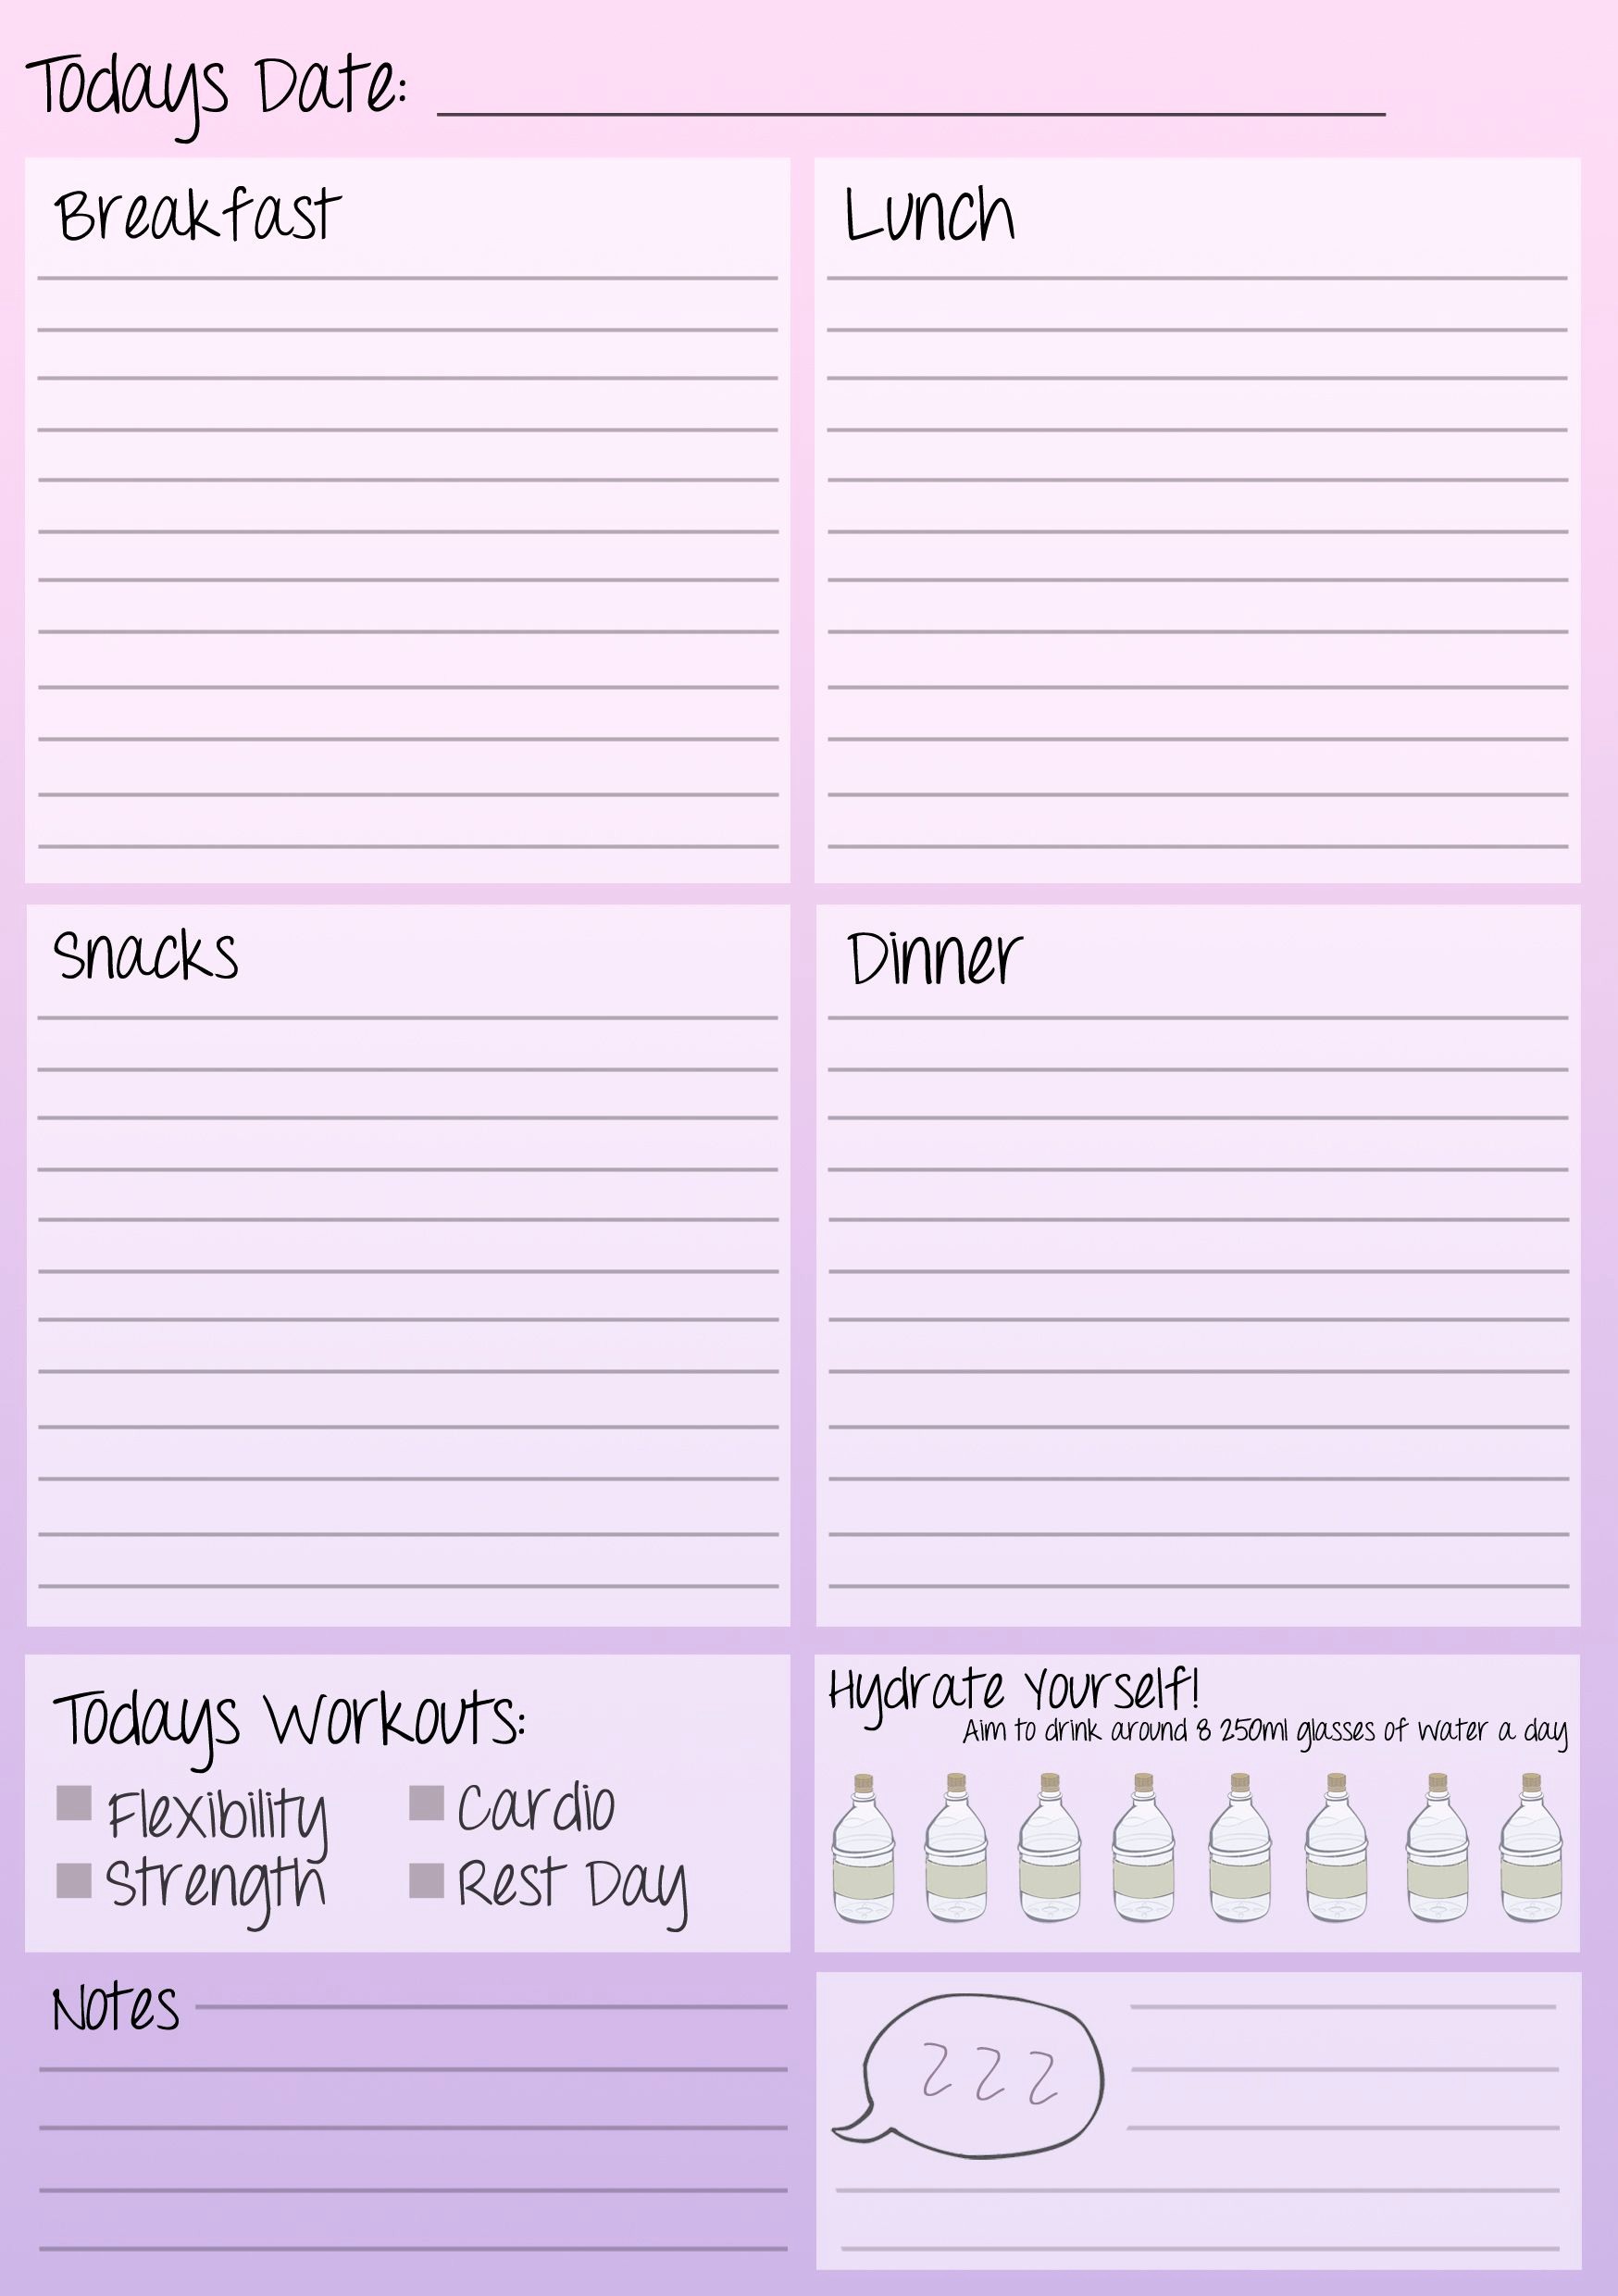 Daily Food and Exercise Log Inspirational Daily Fitness Journal Printable Workout